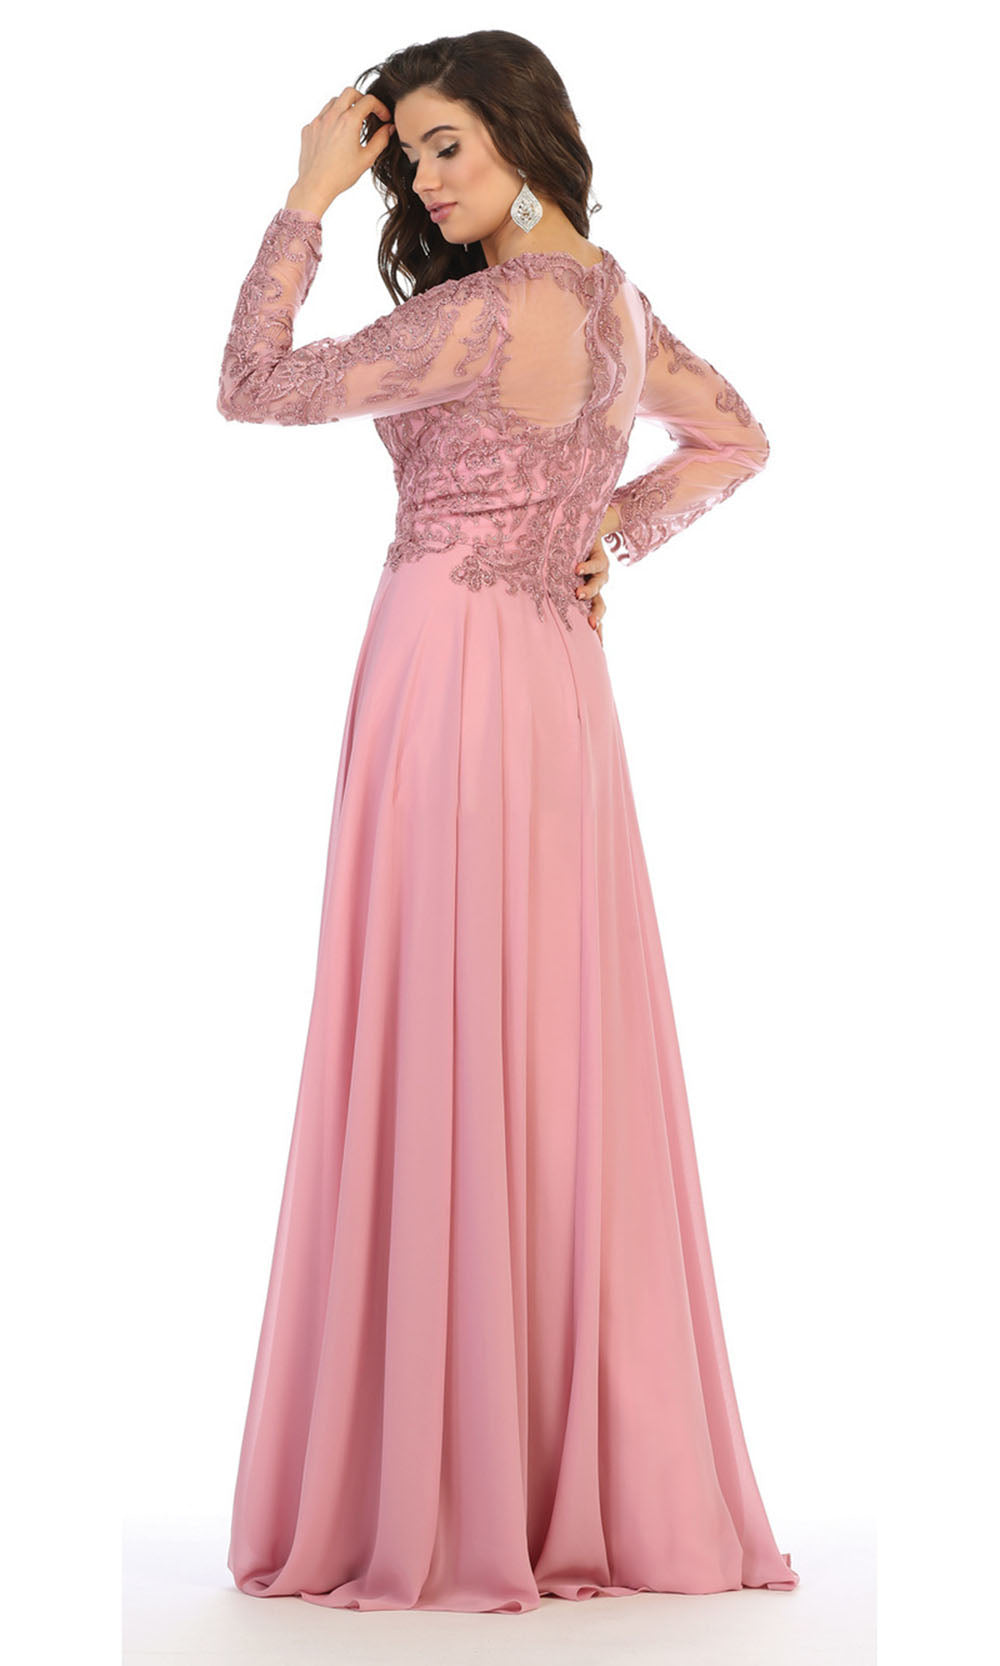 May Queen - RQ7732 Embroidered Chiffon Long Gown In Pink